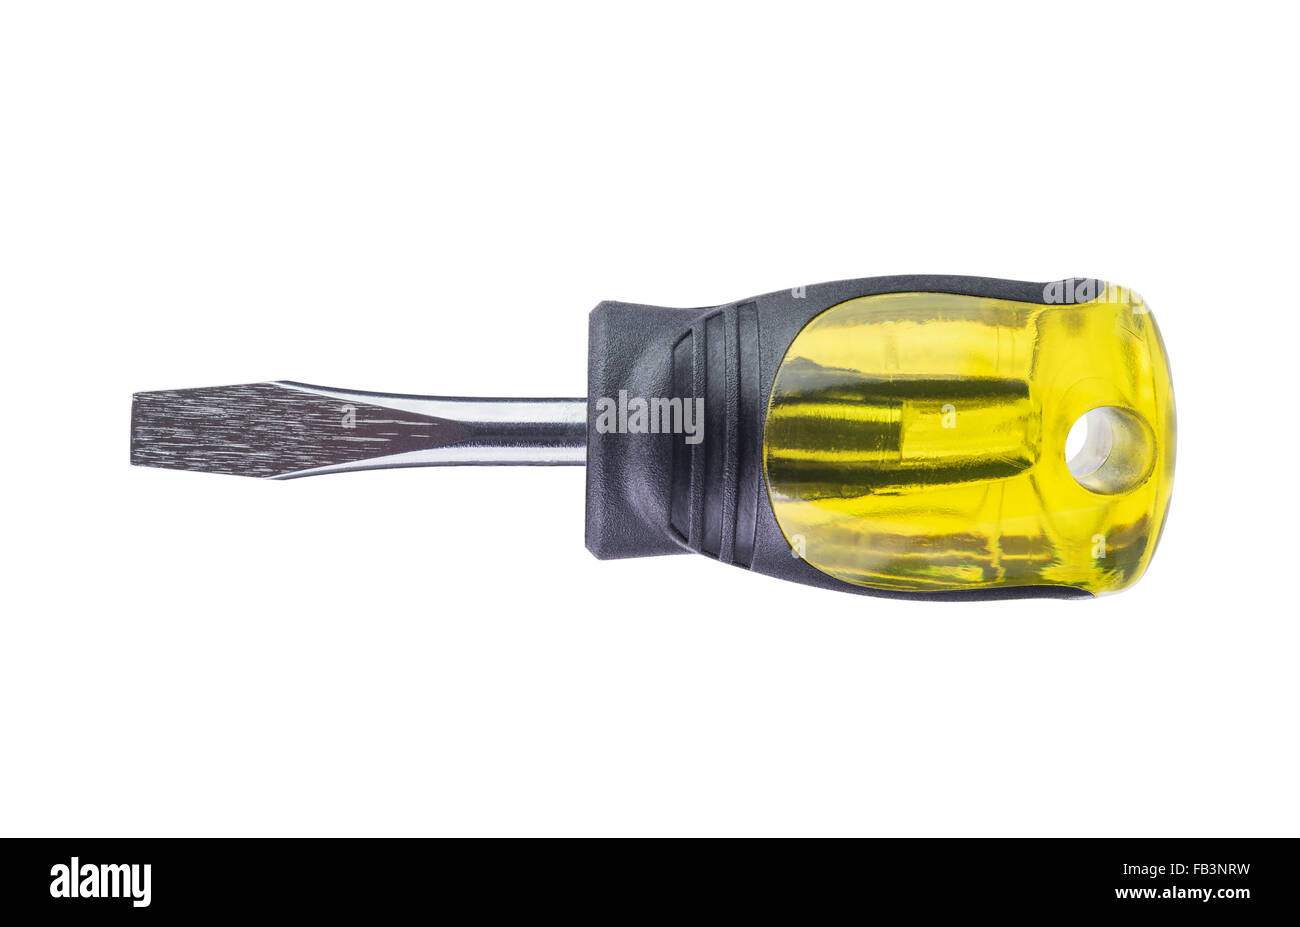 yellow  short screwdriver  isolated on white background Stock Photo